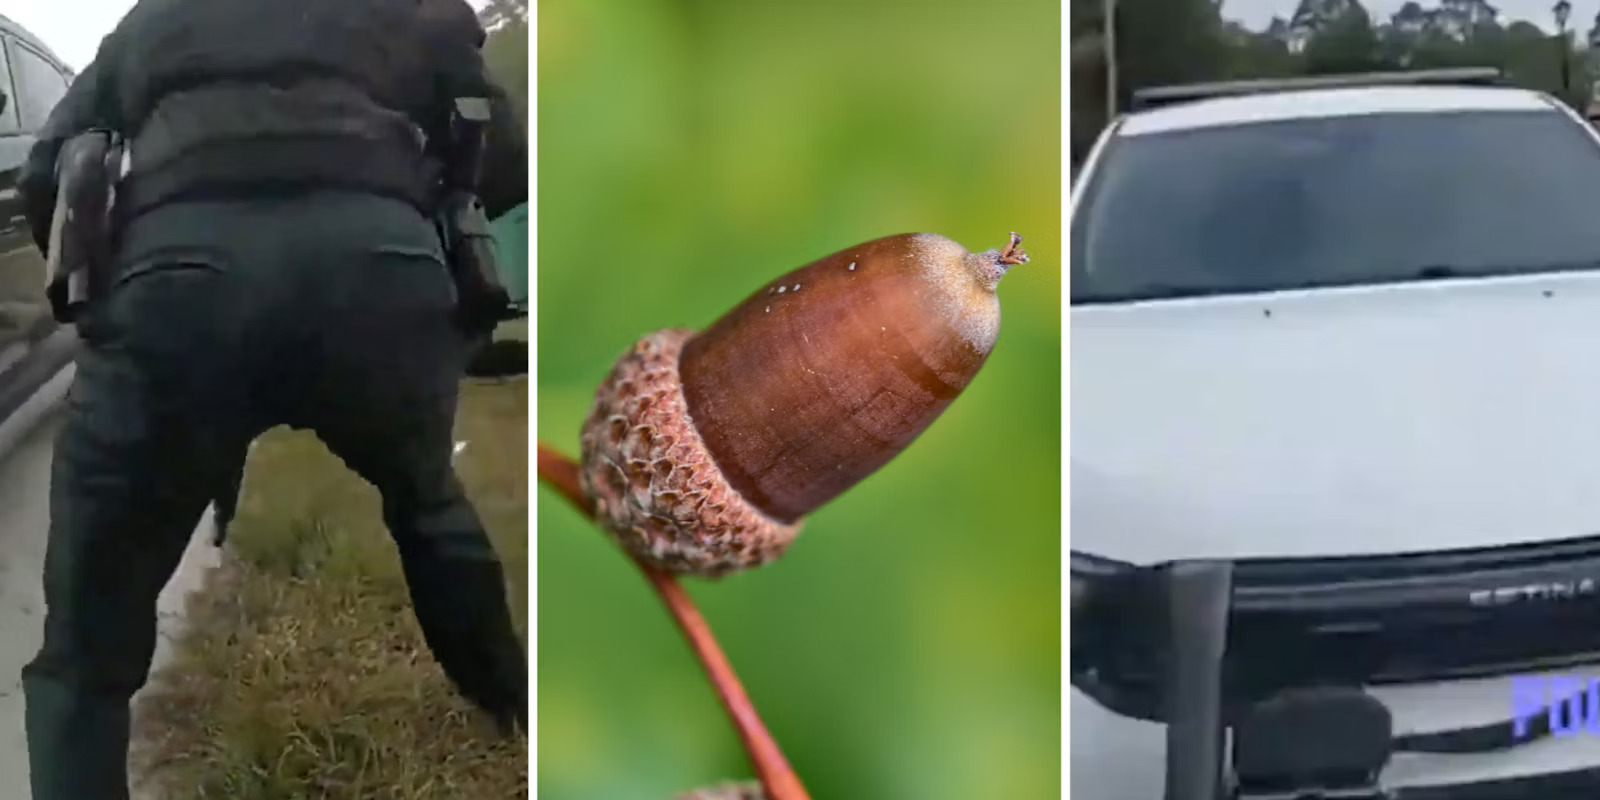 Florida Deputy Opens Fire On His Own Car After Mistaking Acorn For Gunshots